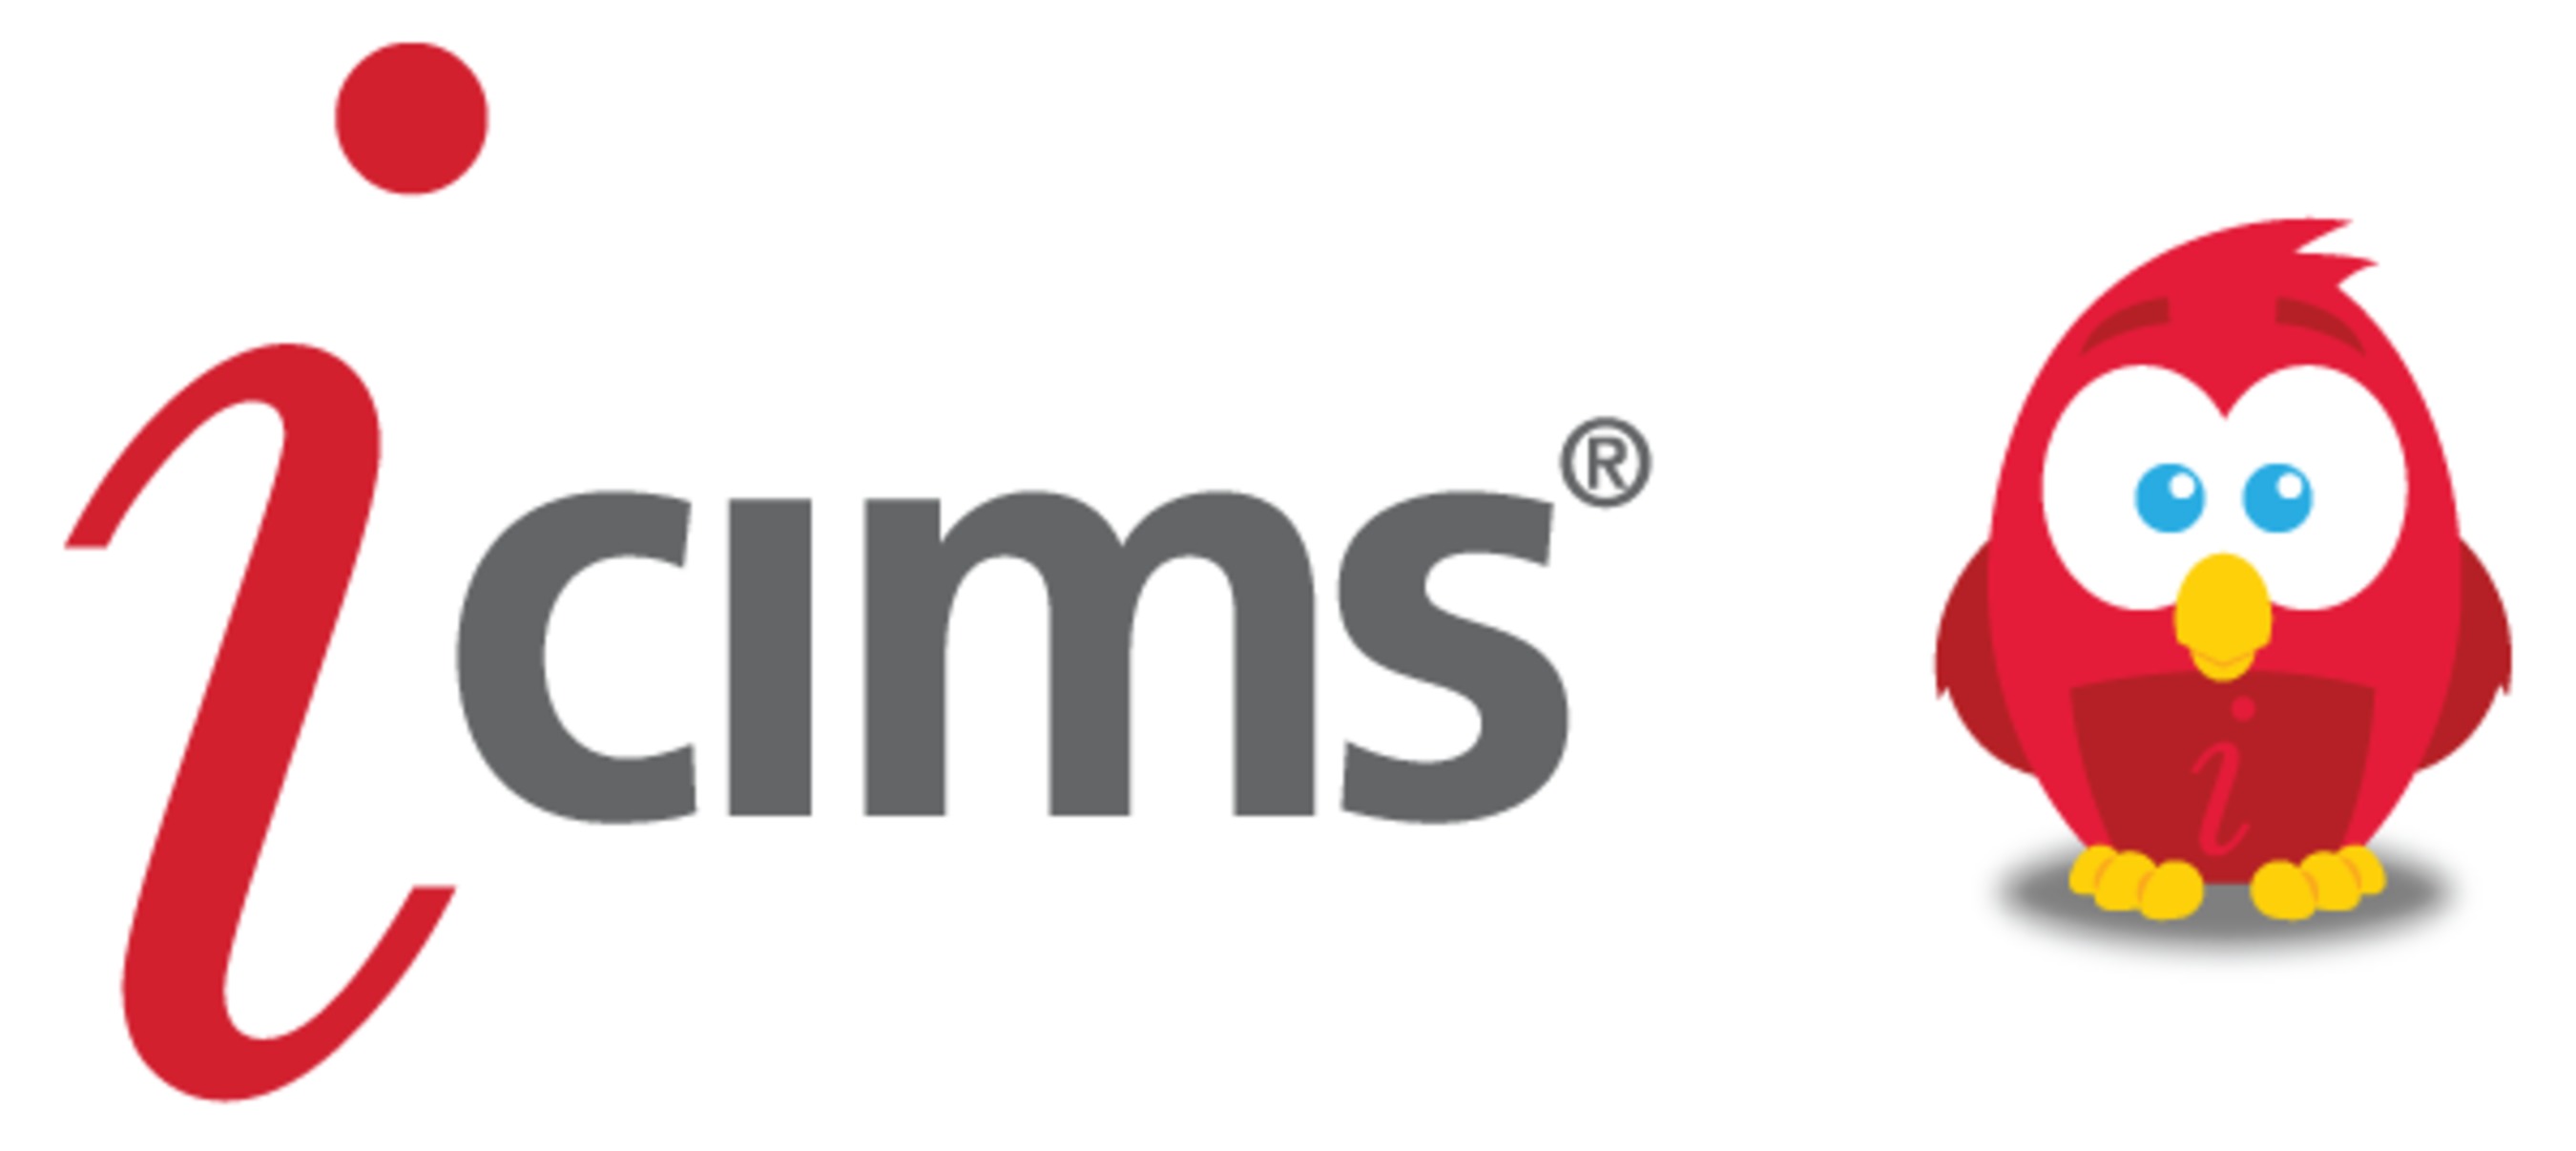 iCIMS, Inc., a leading provider of Software-as-a-Service (SaaS) talent acquisition software solutions for growing businesses. (PRNewsFoto/)